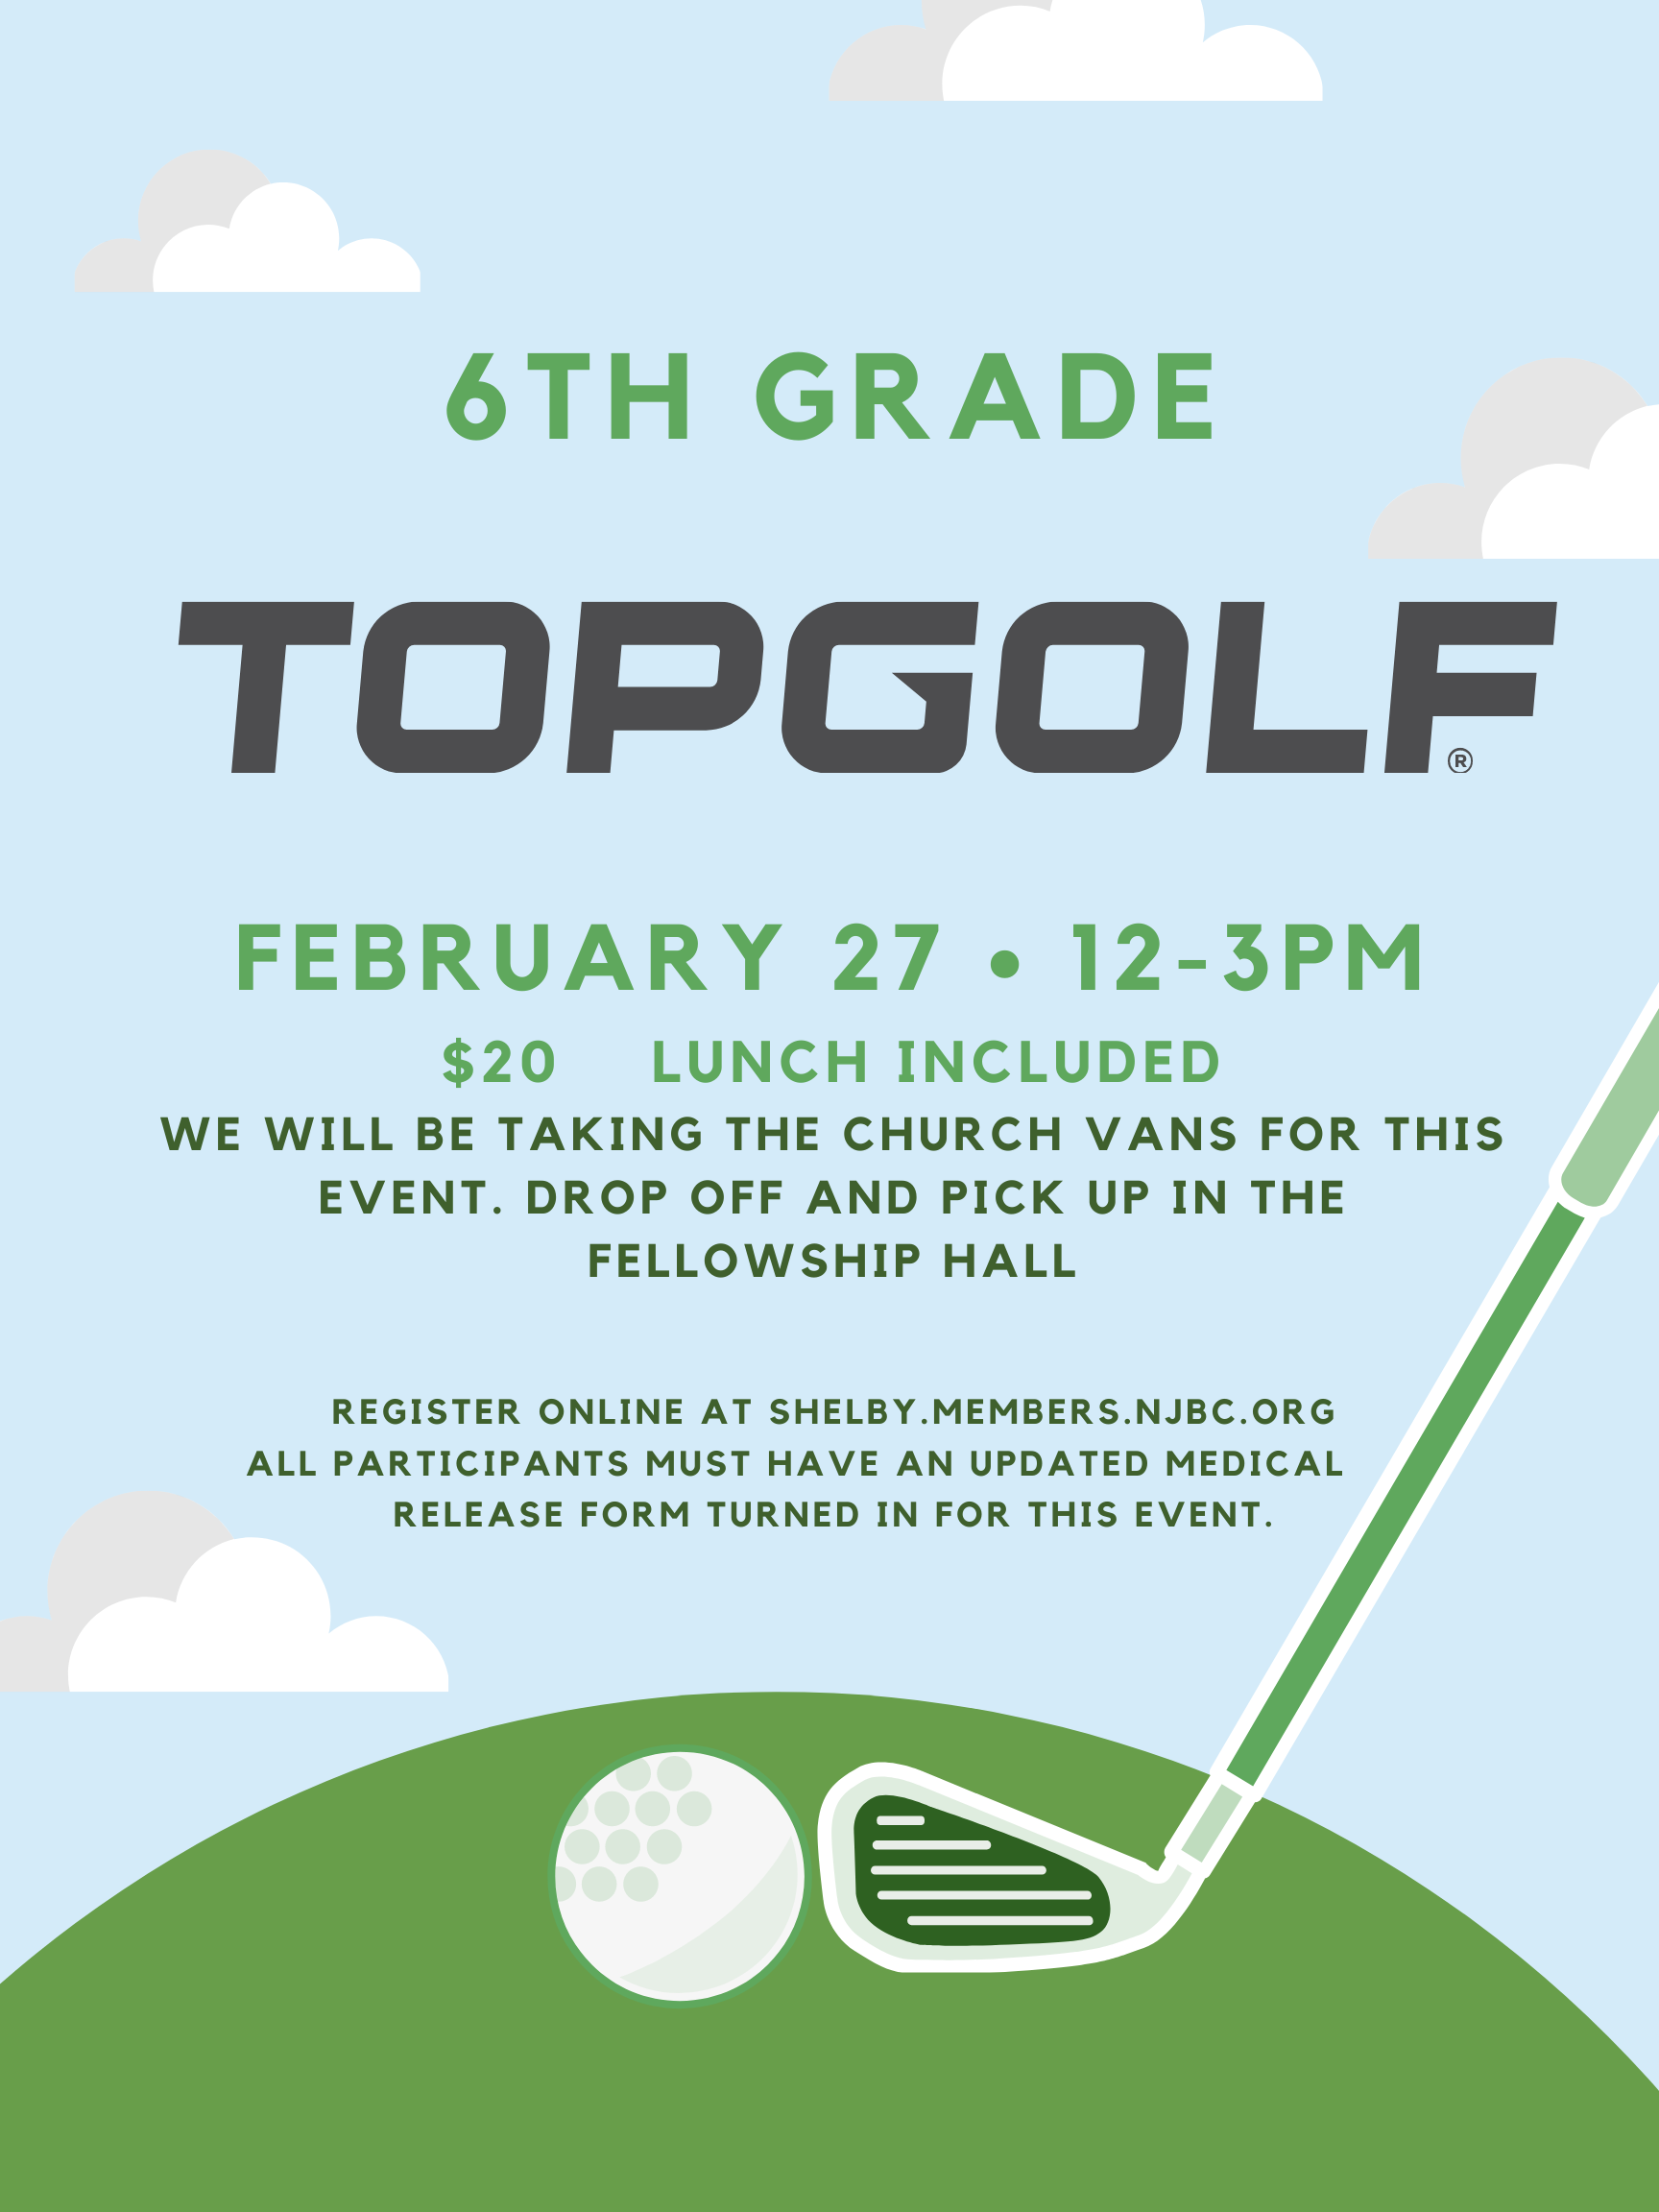 6th Grade Top Golf and Lunch Feb 27